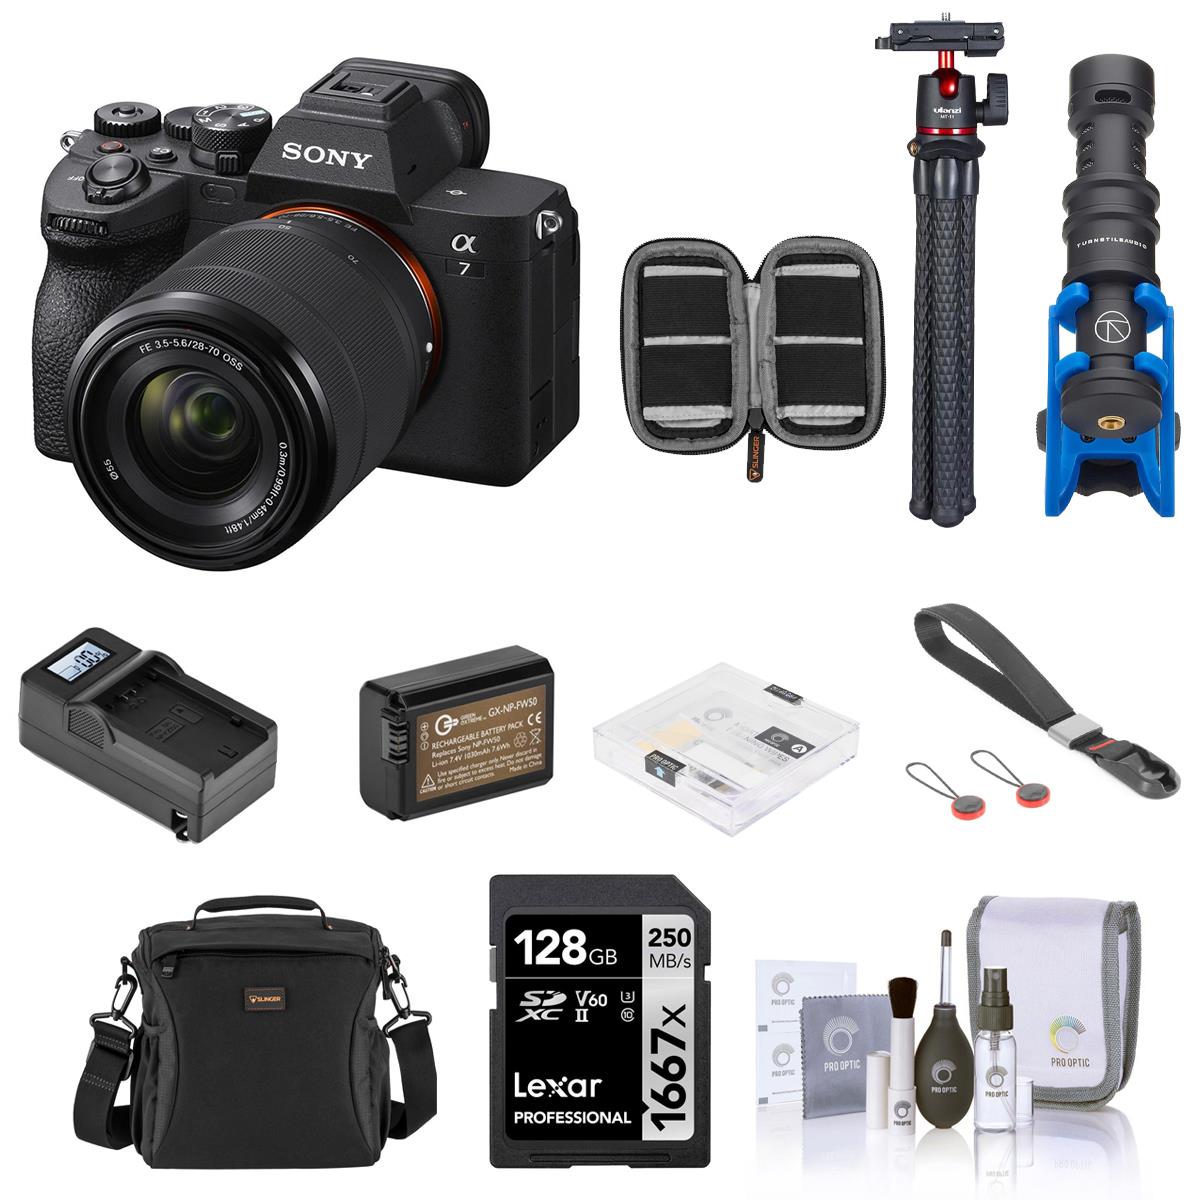 Image of Sony Alpha a7 IV Mirrorless Camera w/28-70mm f/3.5-5.6 Lens and Accessory Kit